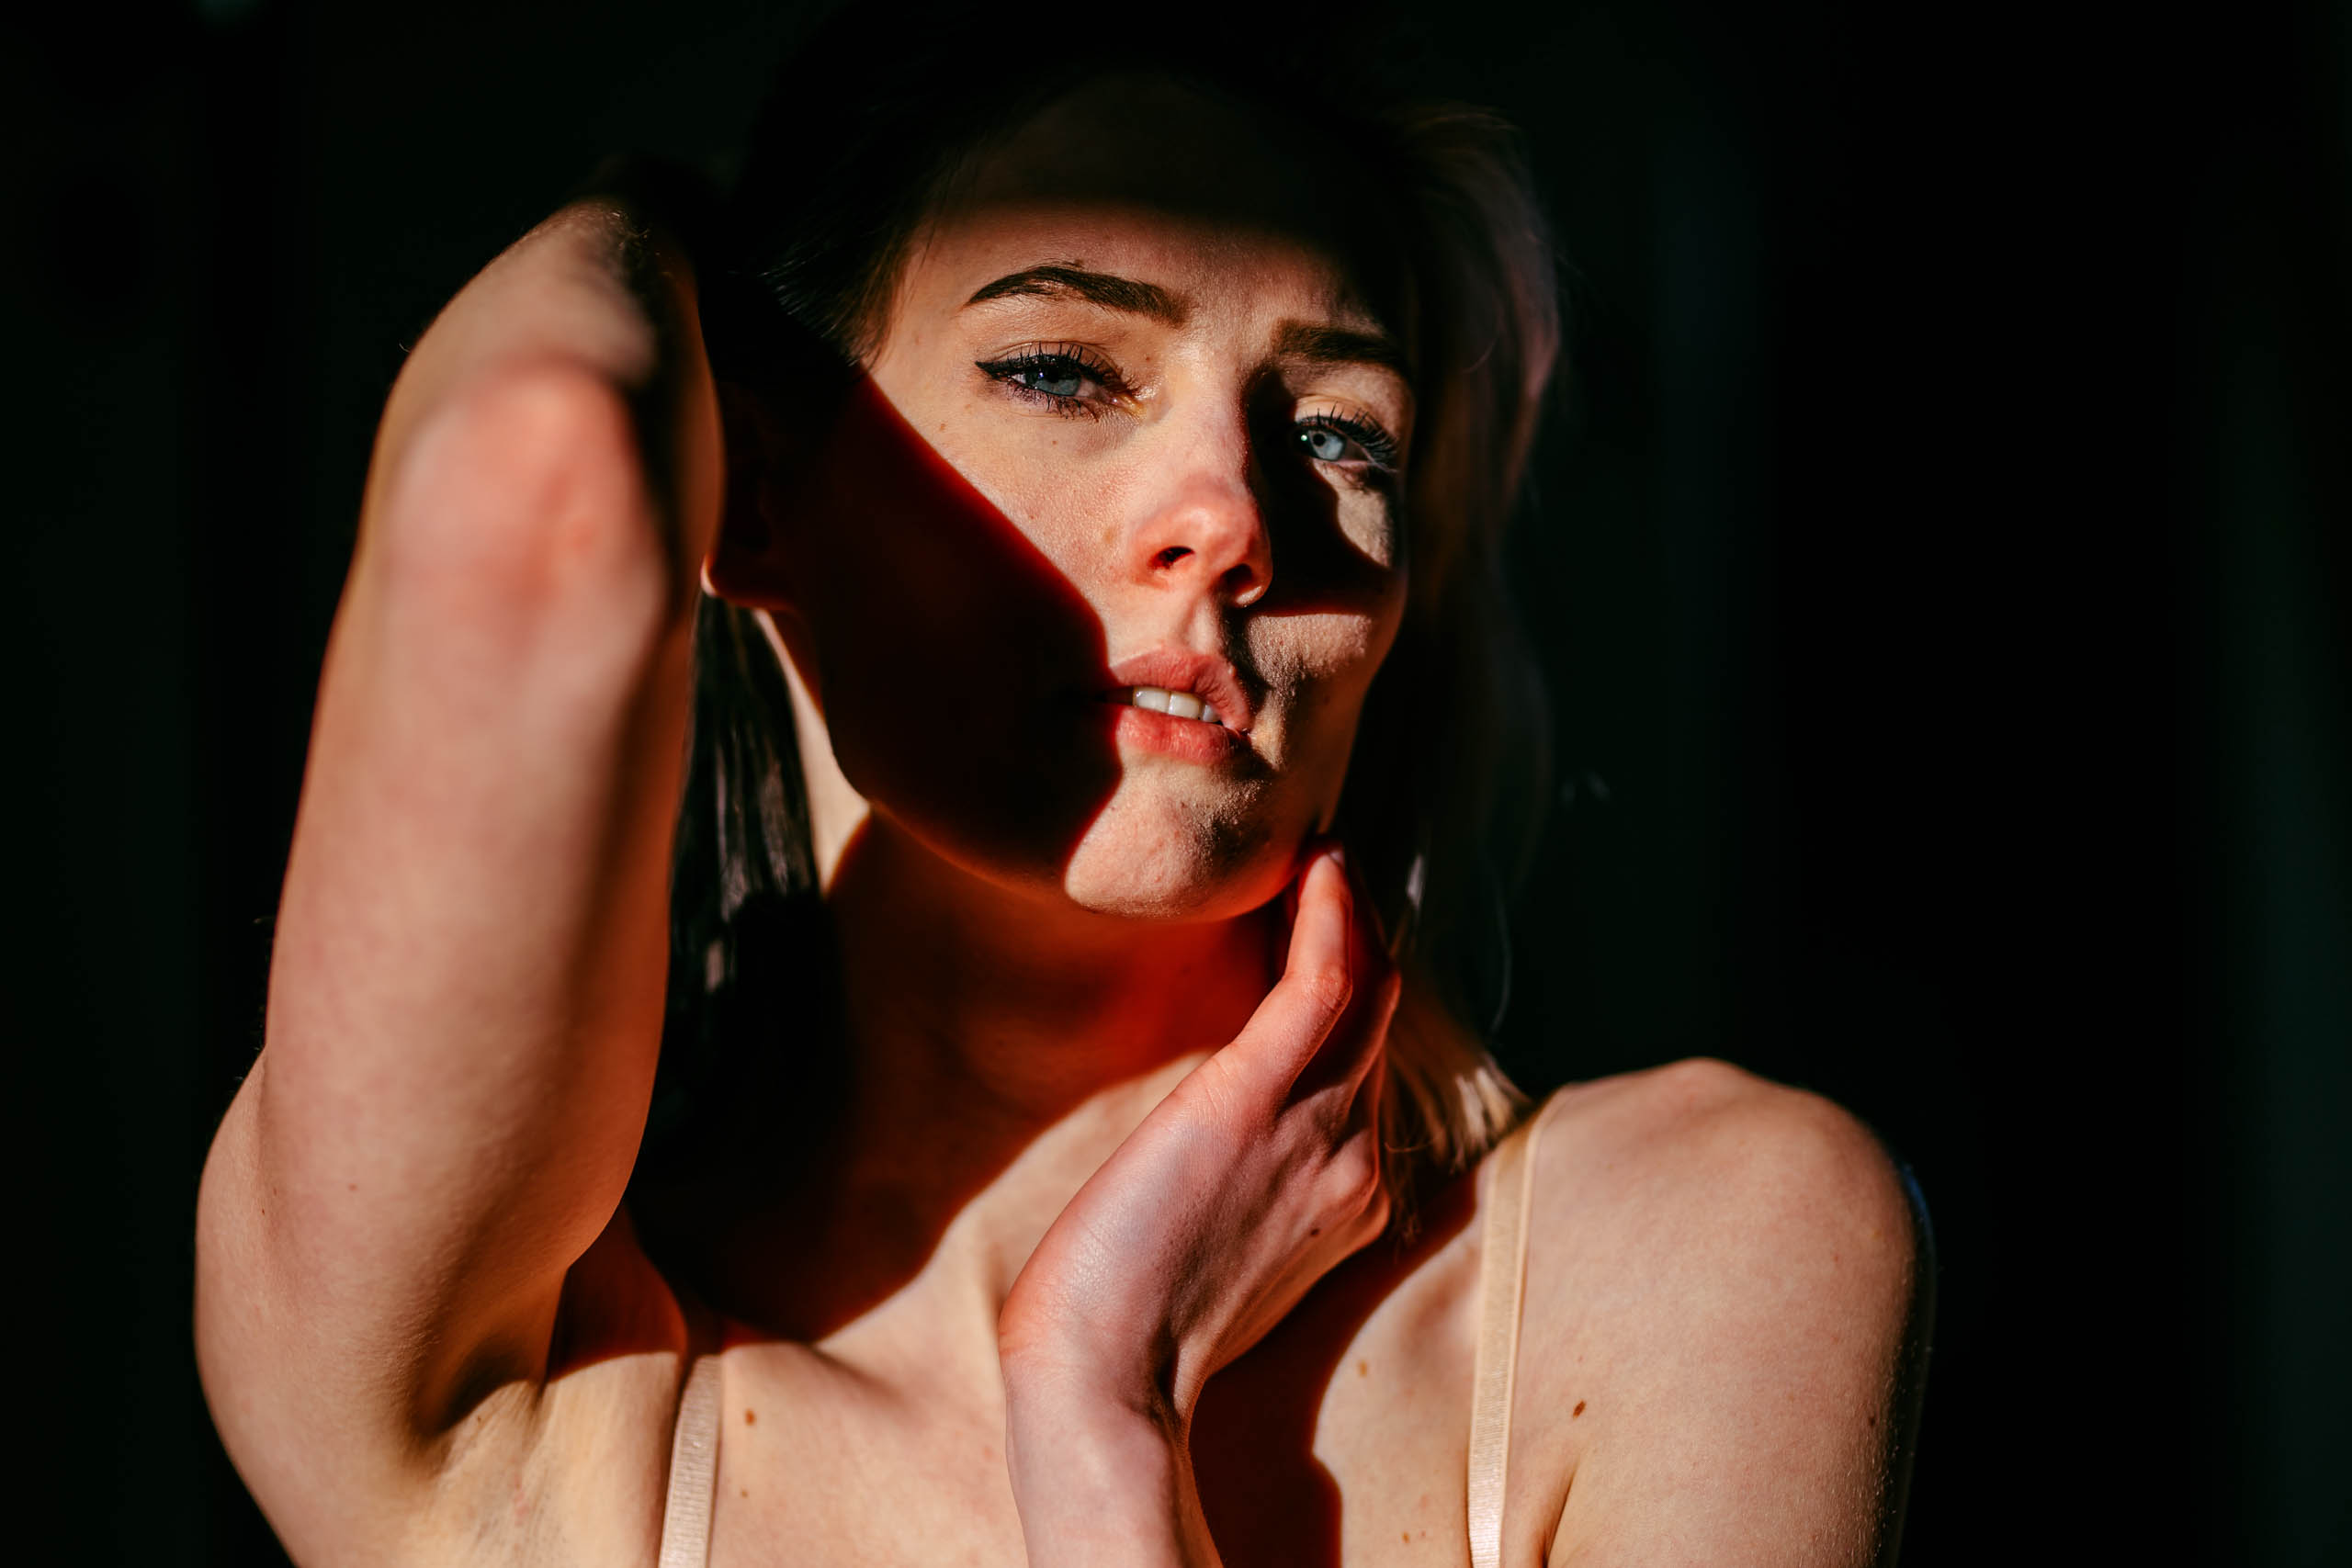 A woman poses in a dark room during a boudoir shoot, with her hand on her face.